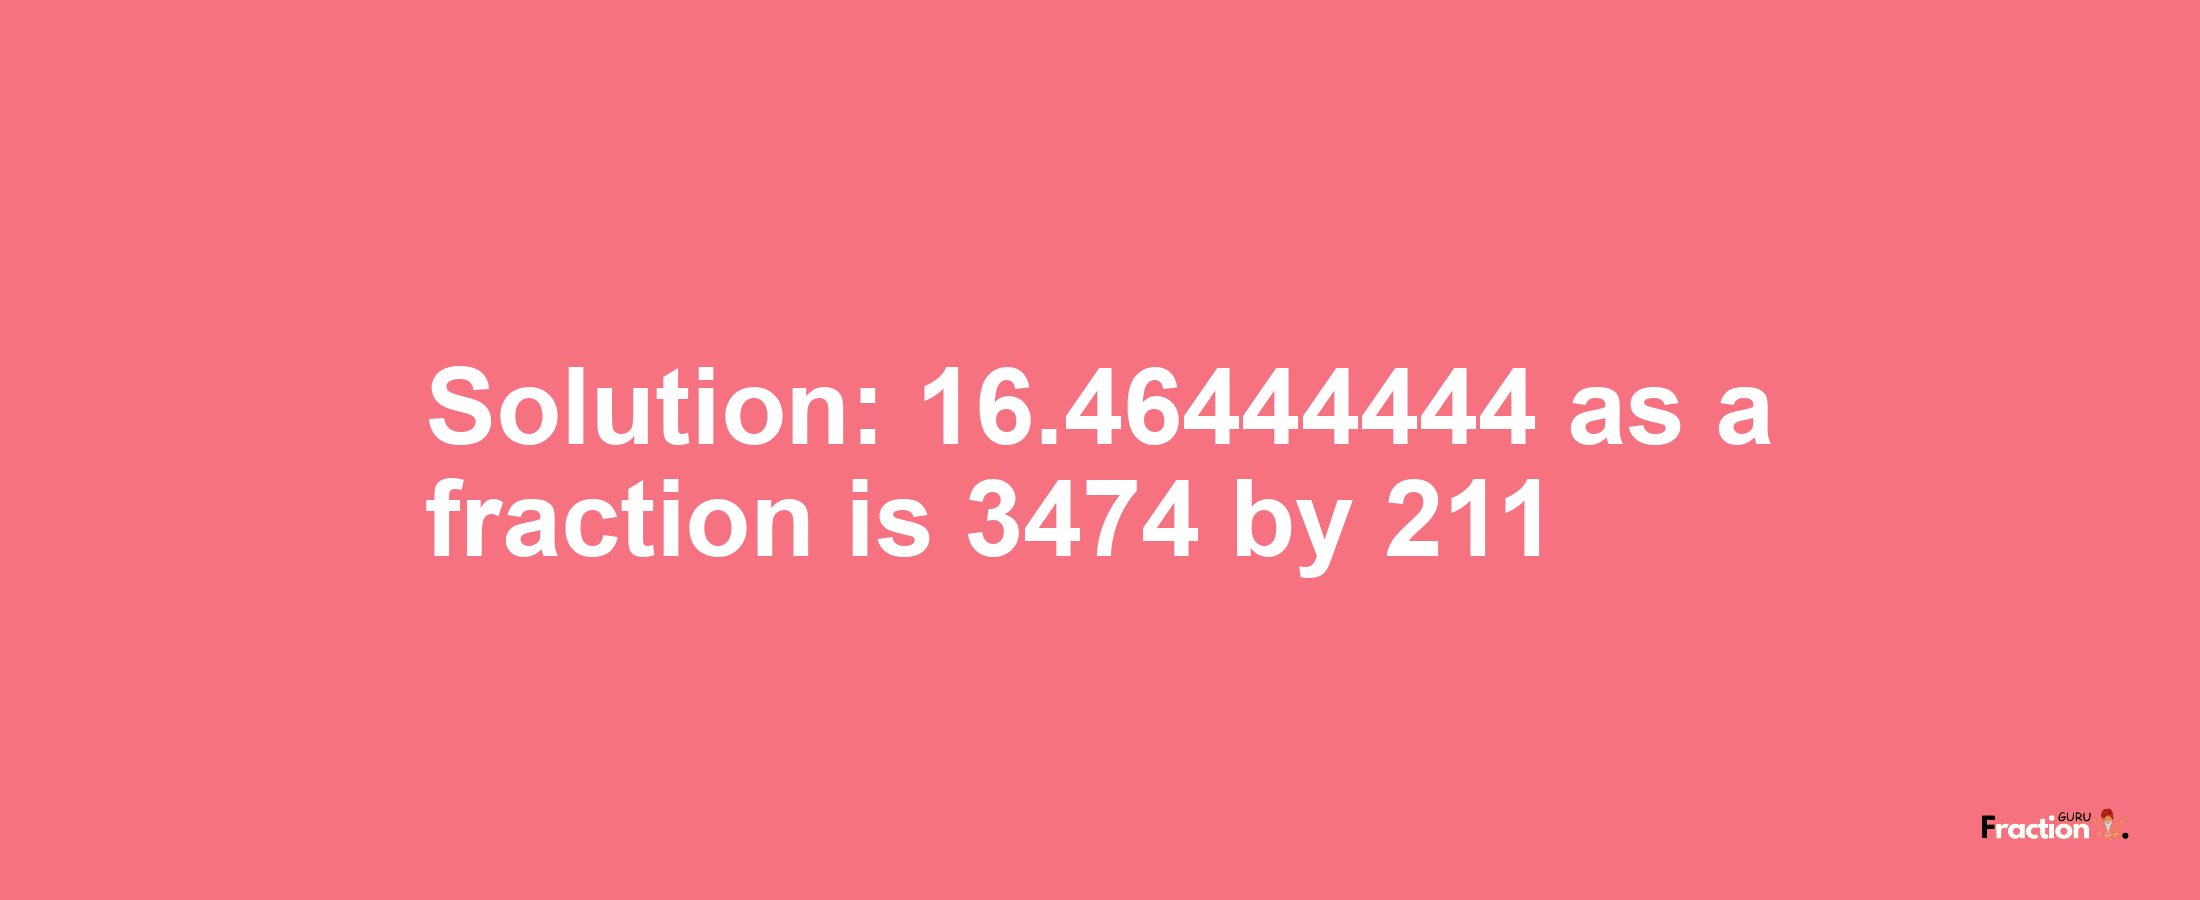 Solution:16.46444444 as a fraction is 3474/211